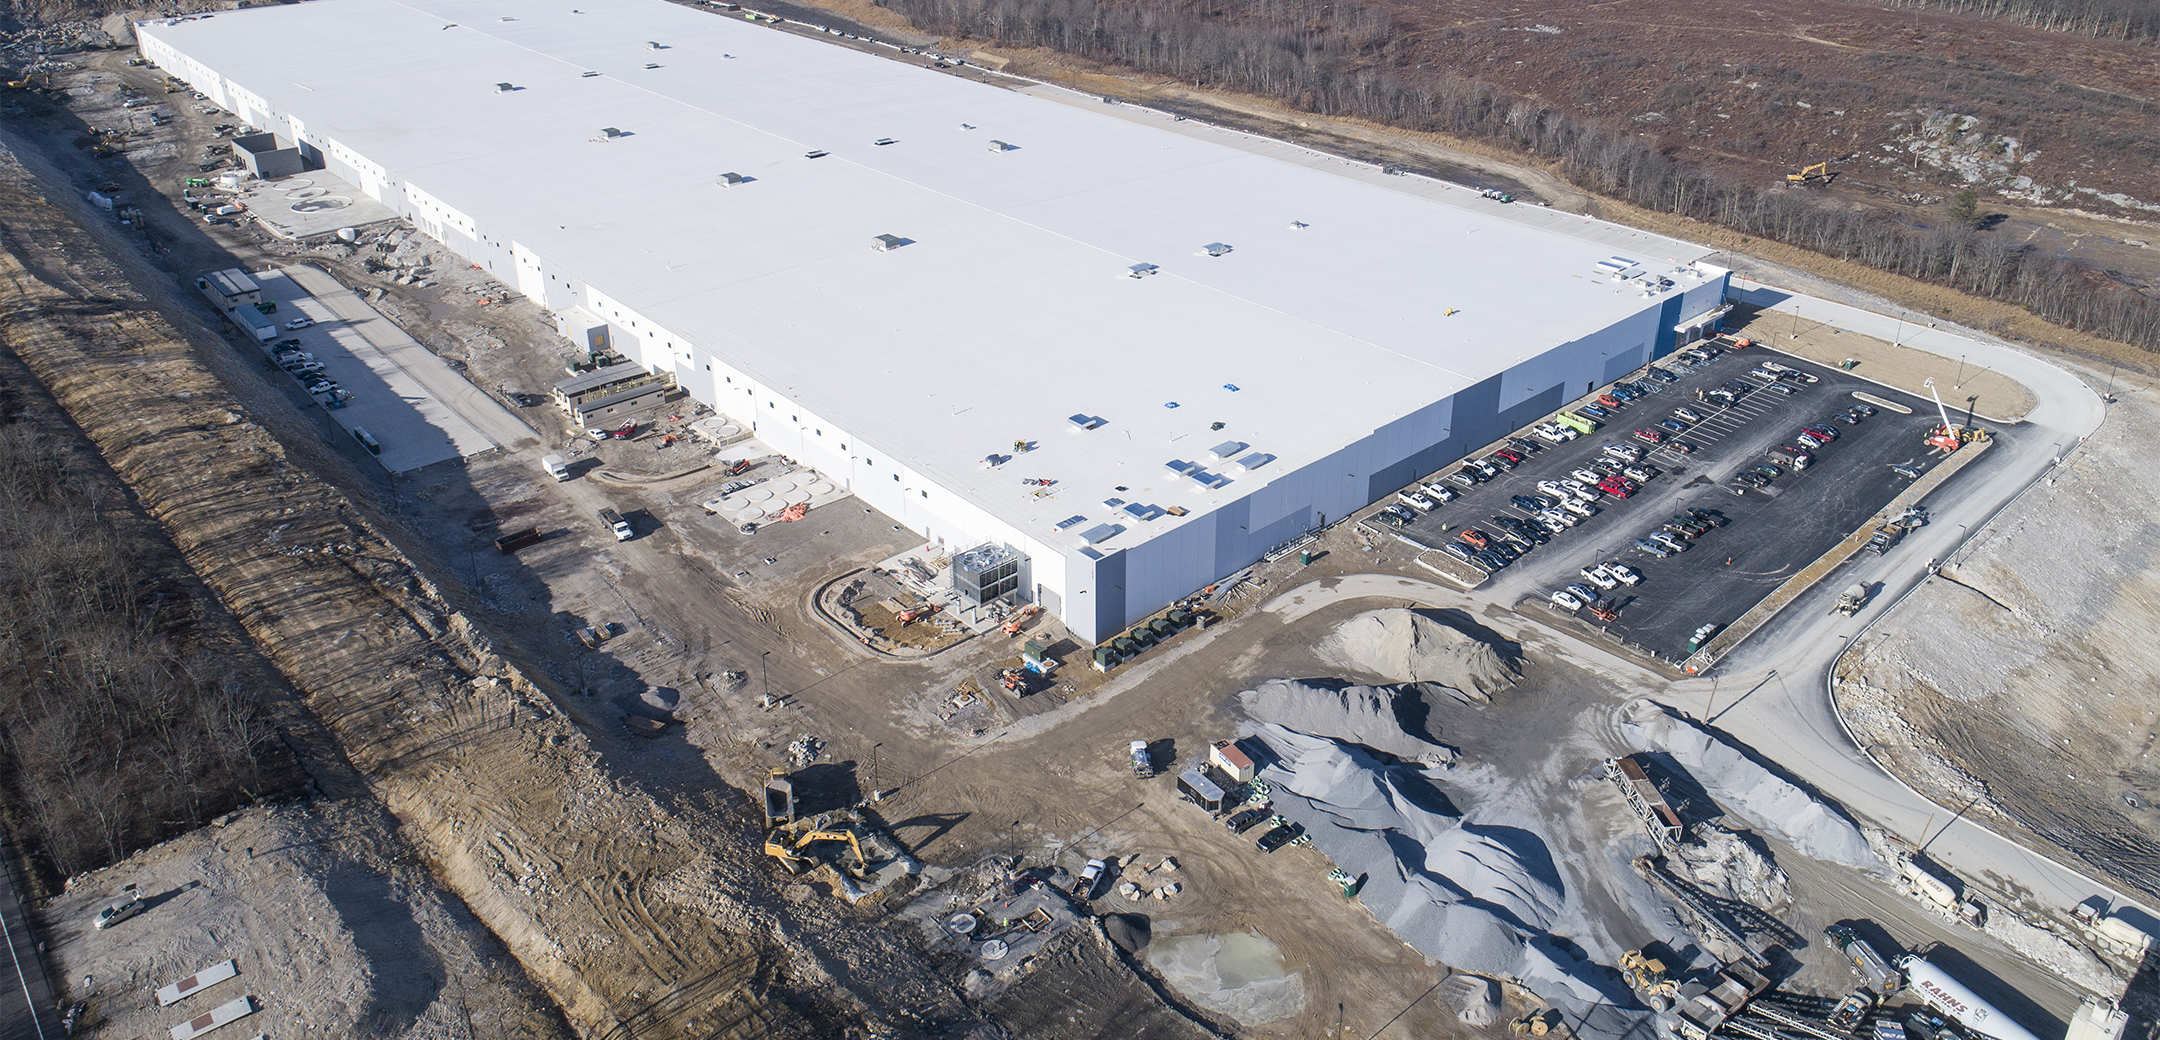 An aerial drone shot of a water bottling industrial facility with white walls and a parking lot in front with cars.